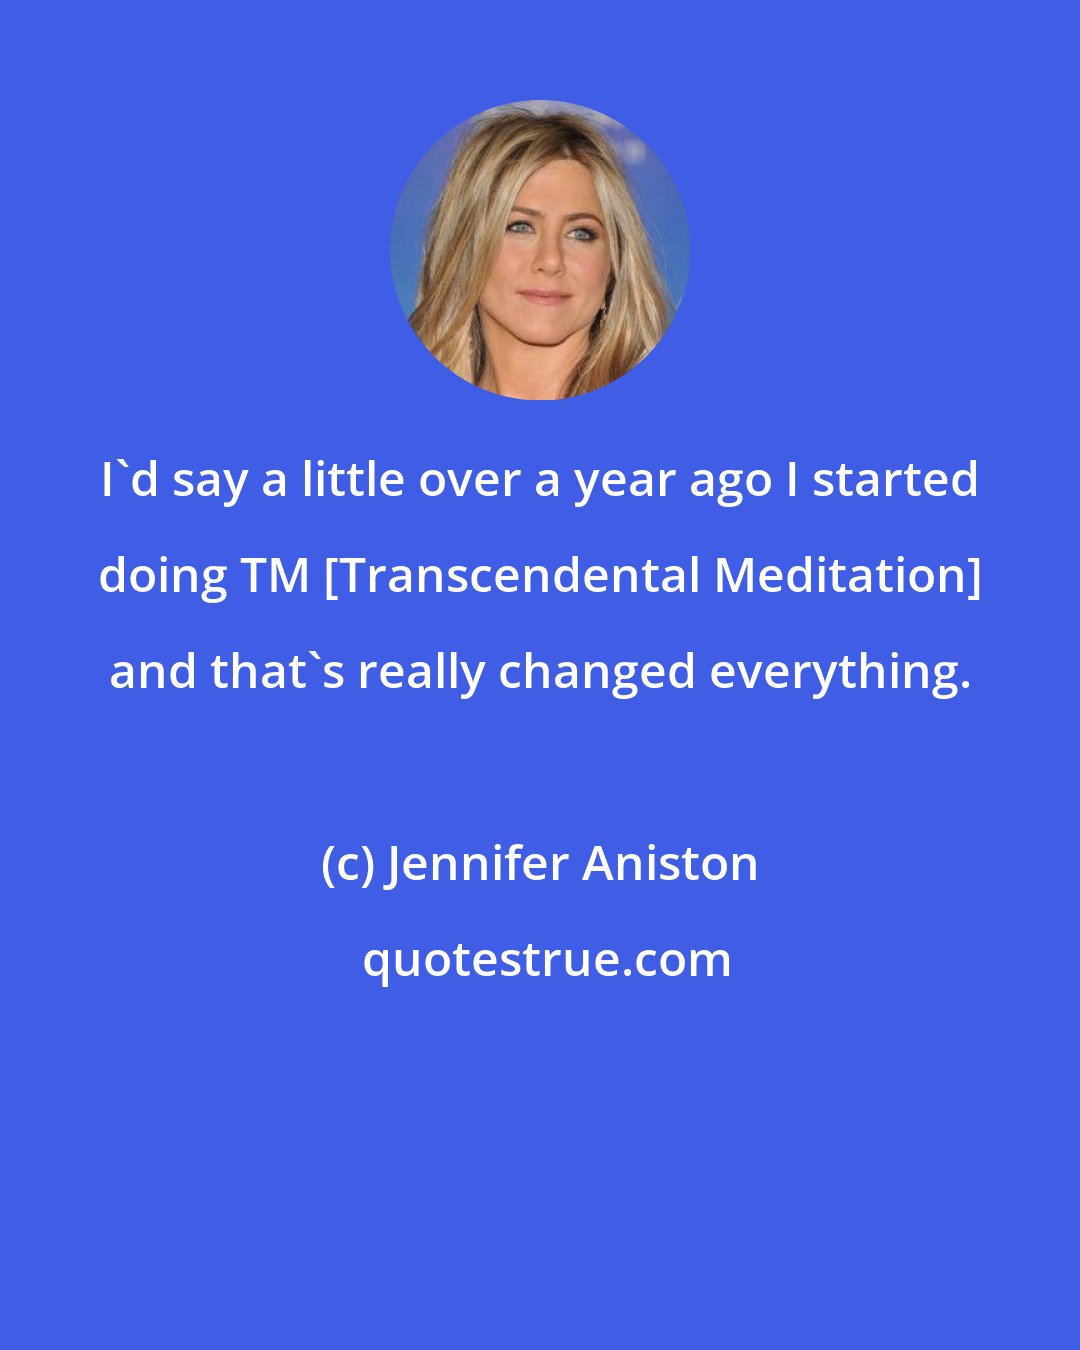 Jennifer Aniston: I'd say a little over a year ago I started doing TM [Transcendental Meditation] and that's really changed everything.